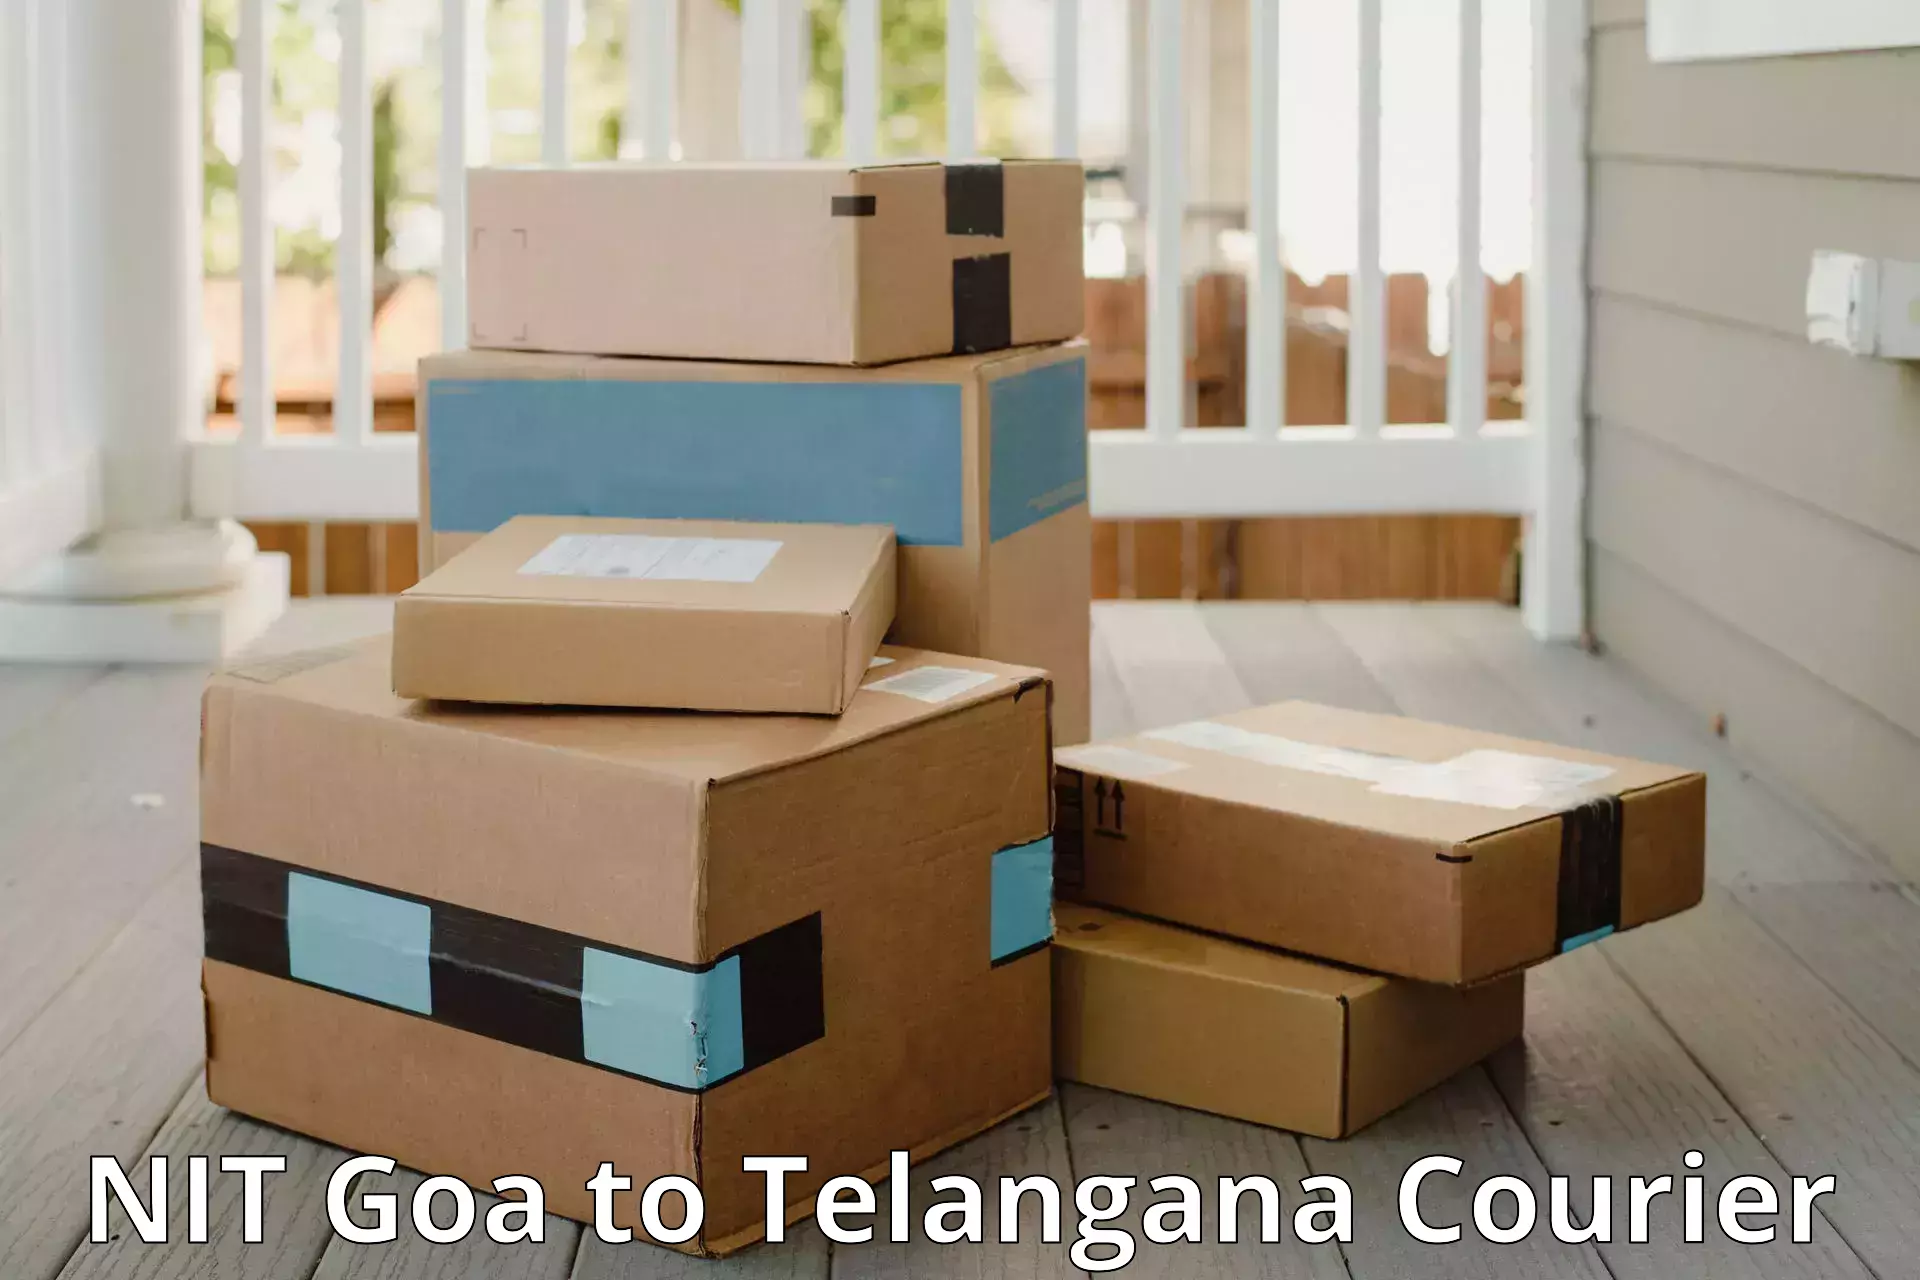 Personal effects shipping in NIT Goa to Telangana